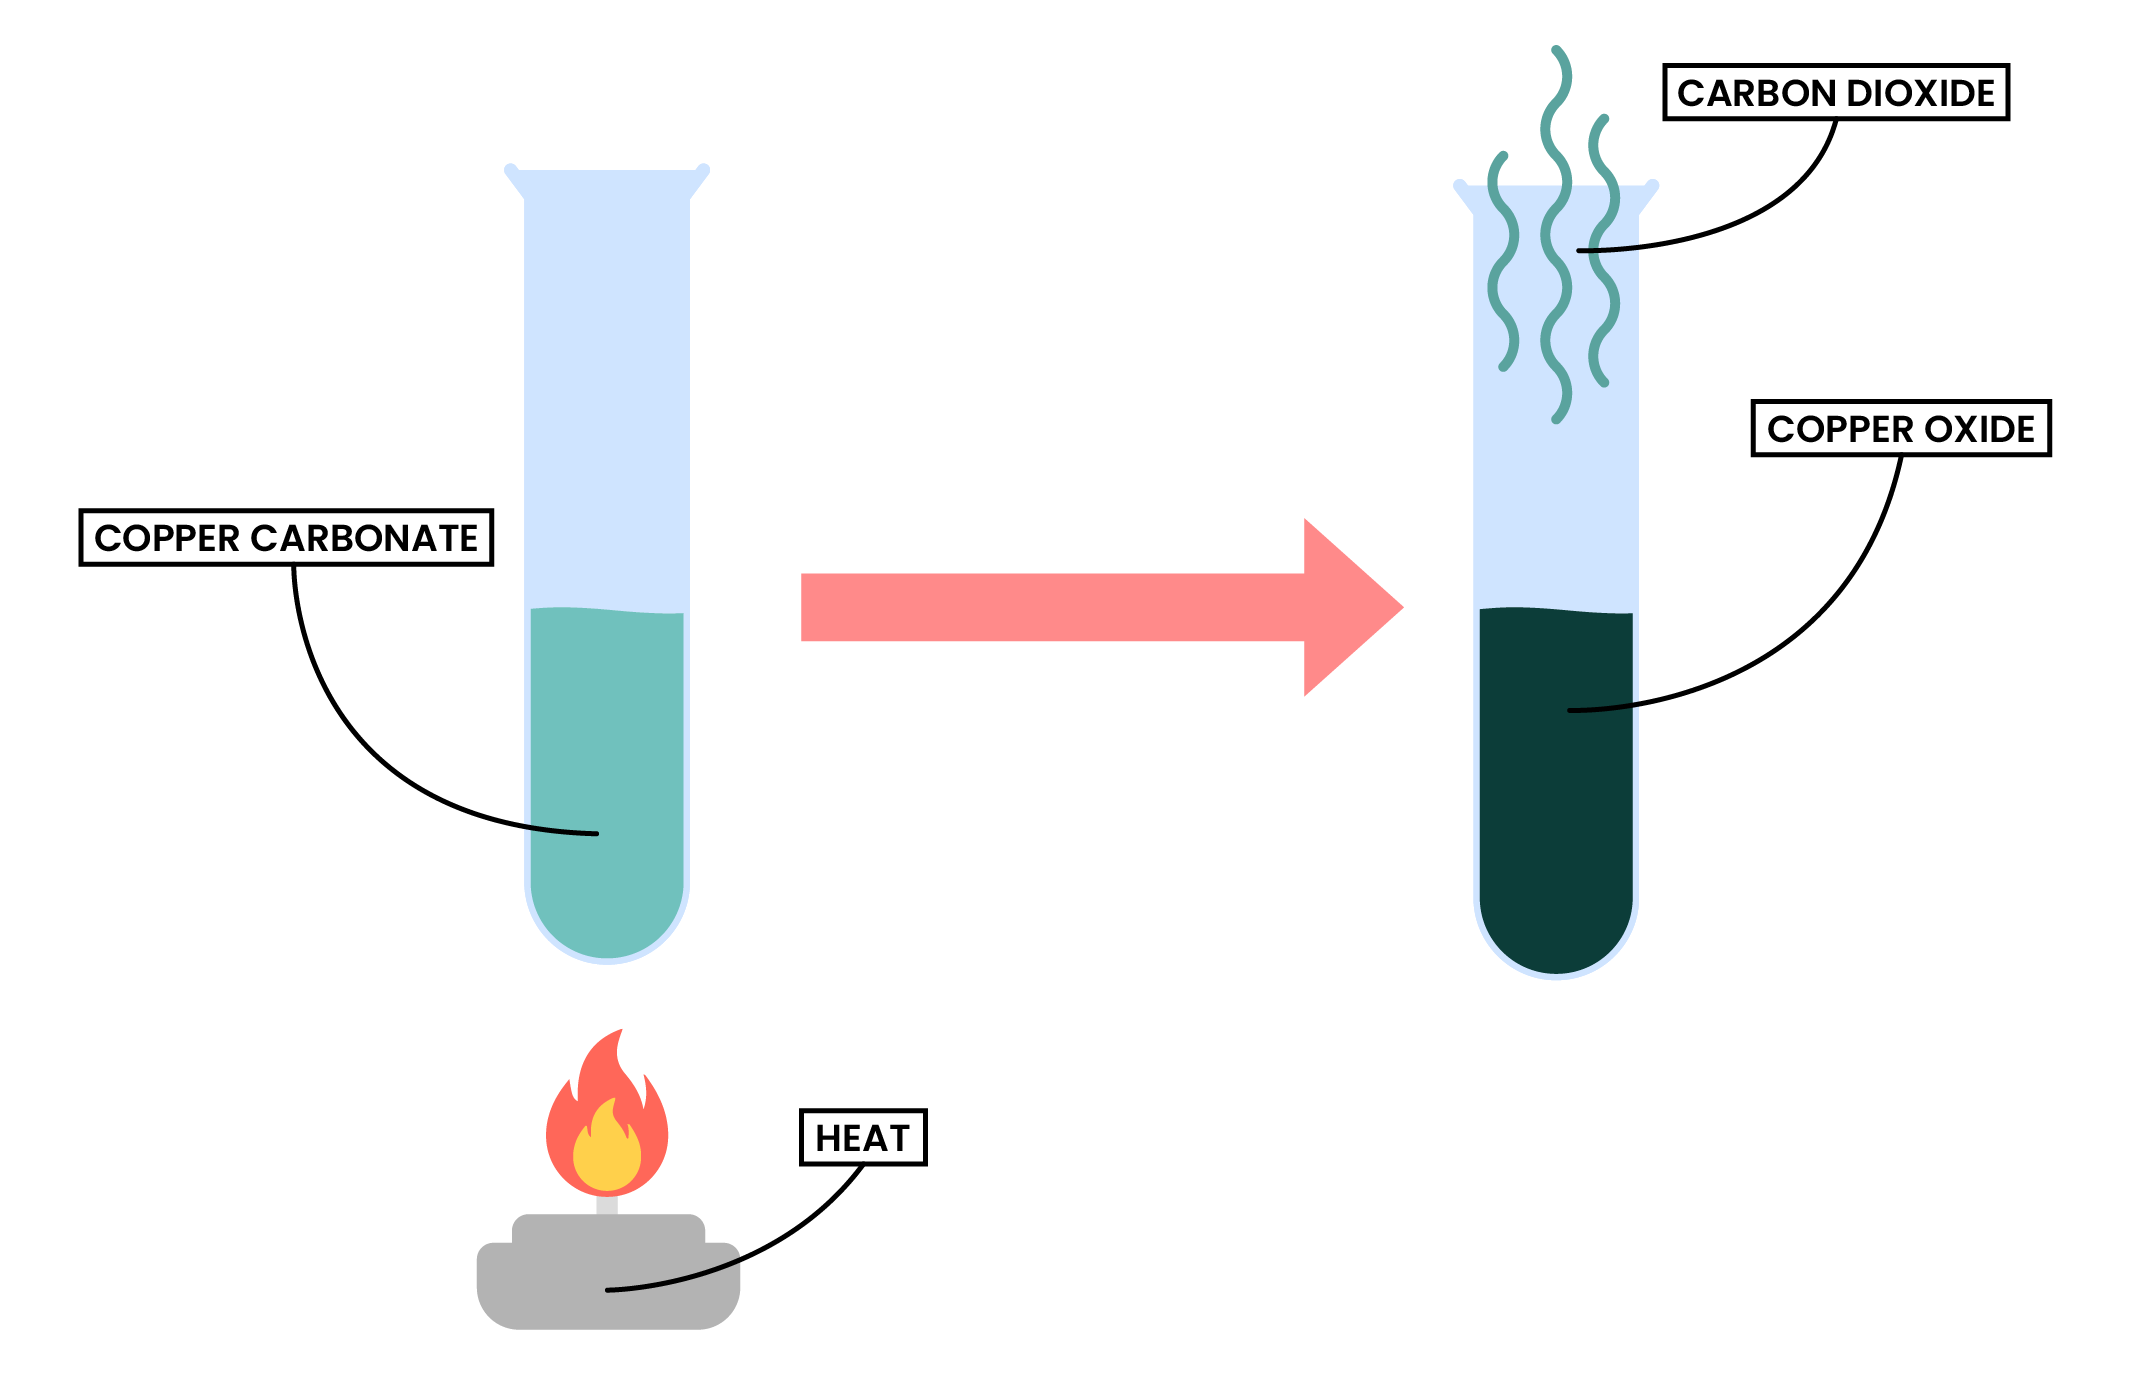 edexcel_igcse_chemistry_topic 12_gases in the atmosphere_002_reaction of copper carbonate with oxygen and heat diagram labelled